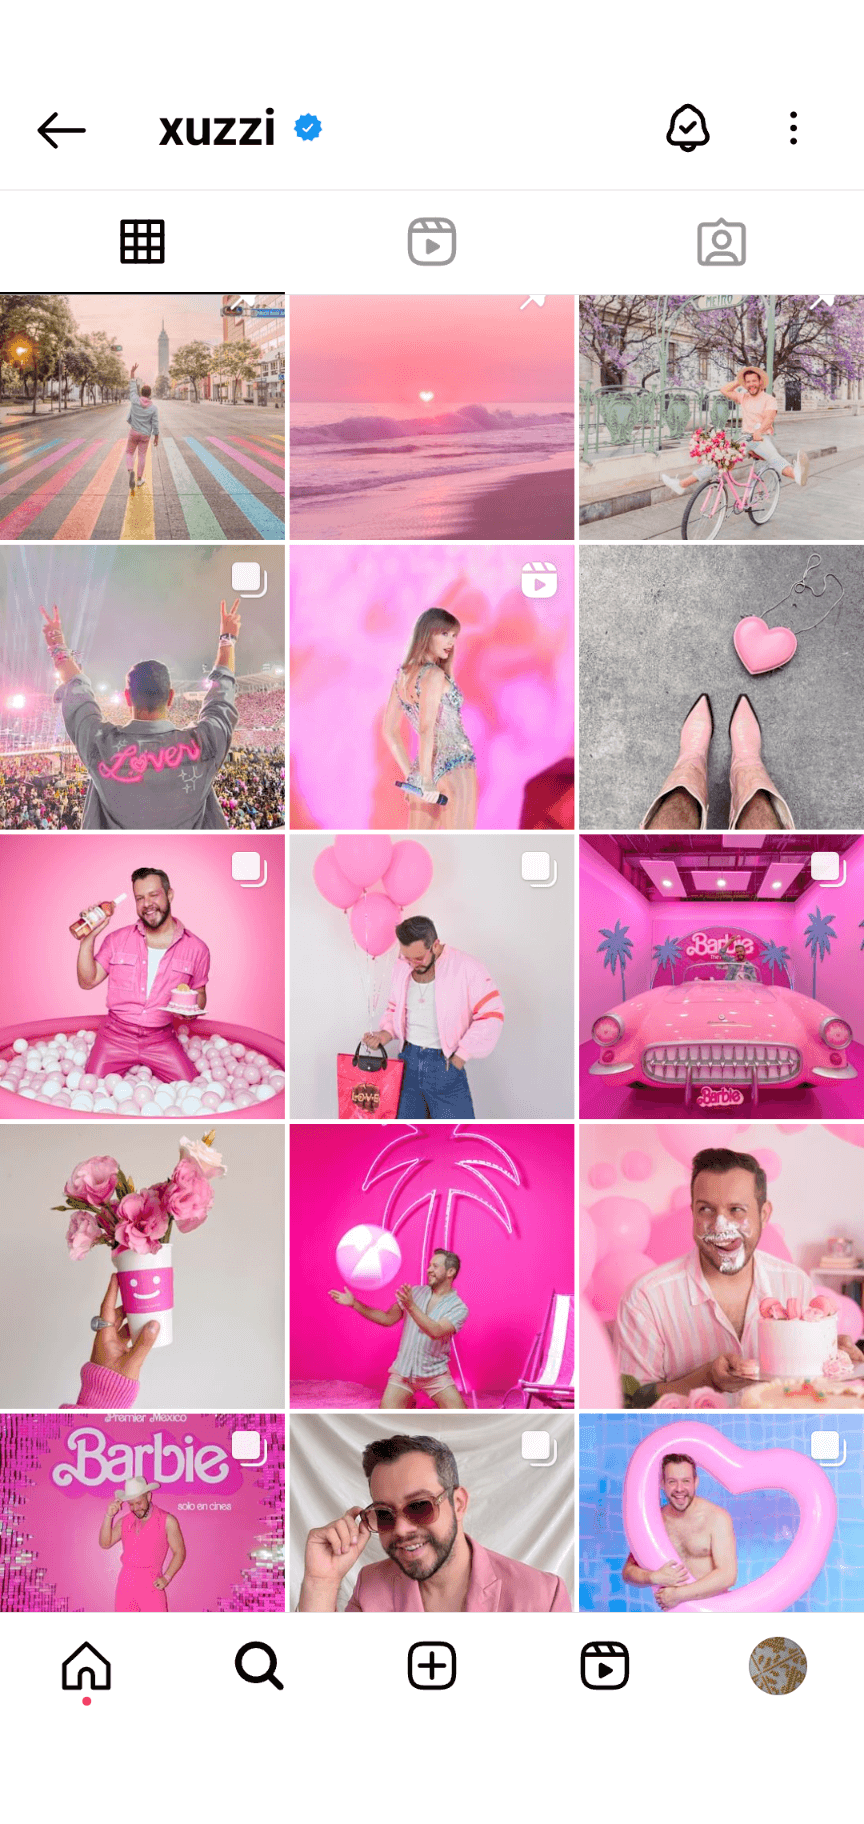 common-creative-mistakes-on-instagram-obsessed-with-the-aesthetic-xuzzi-3